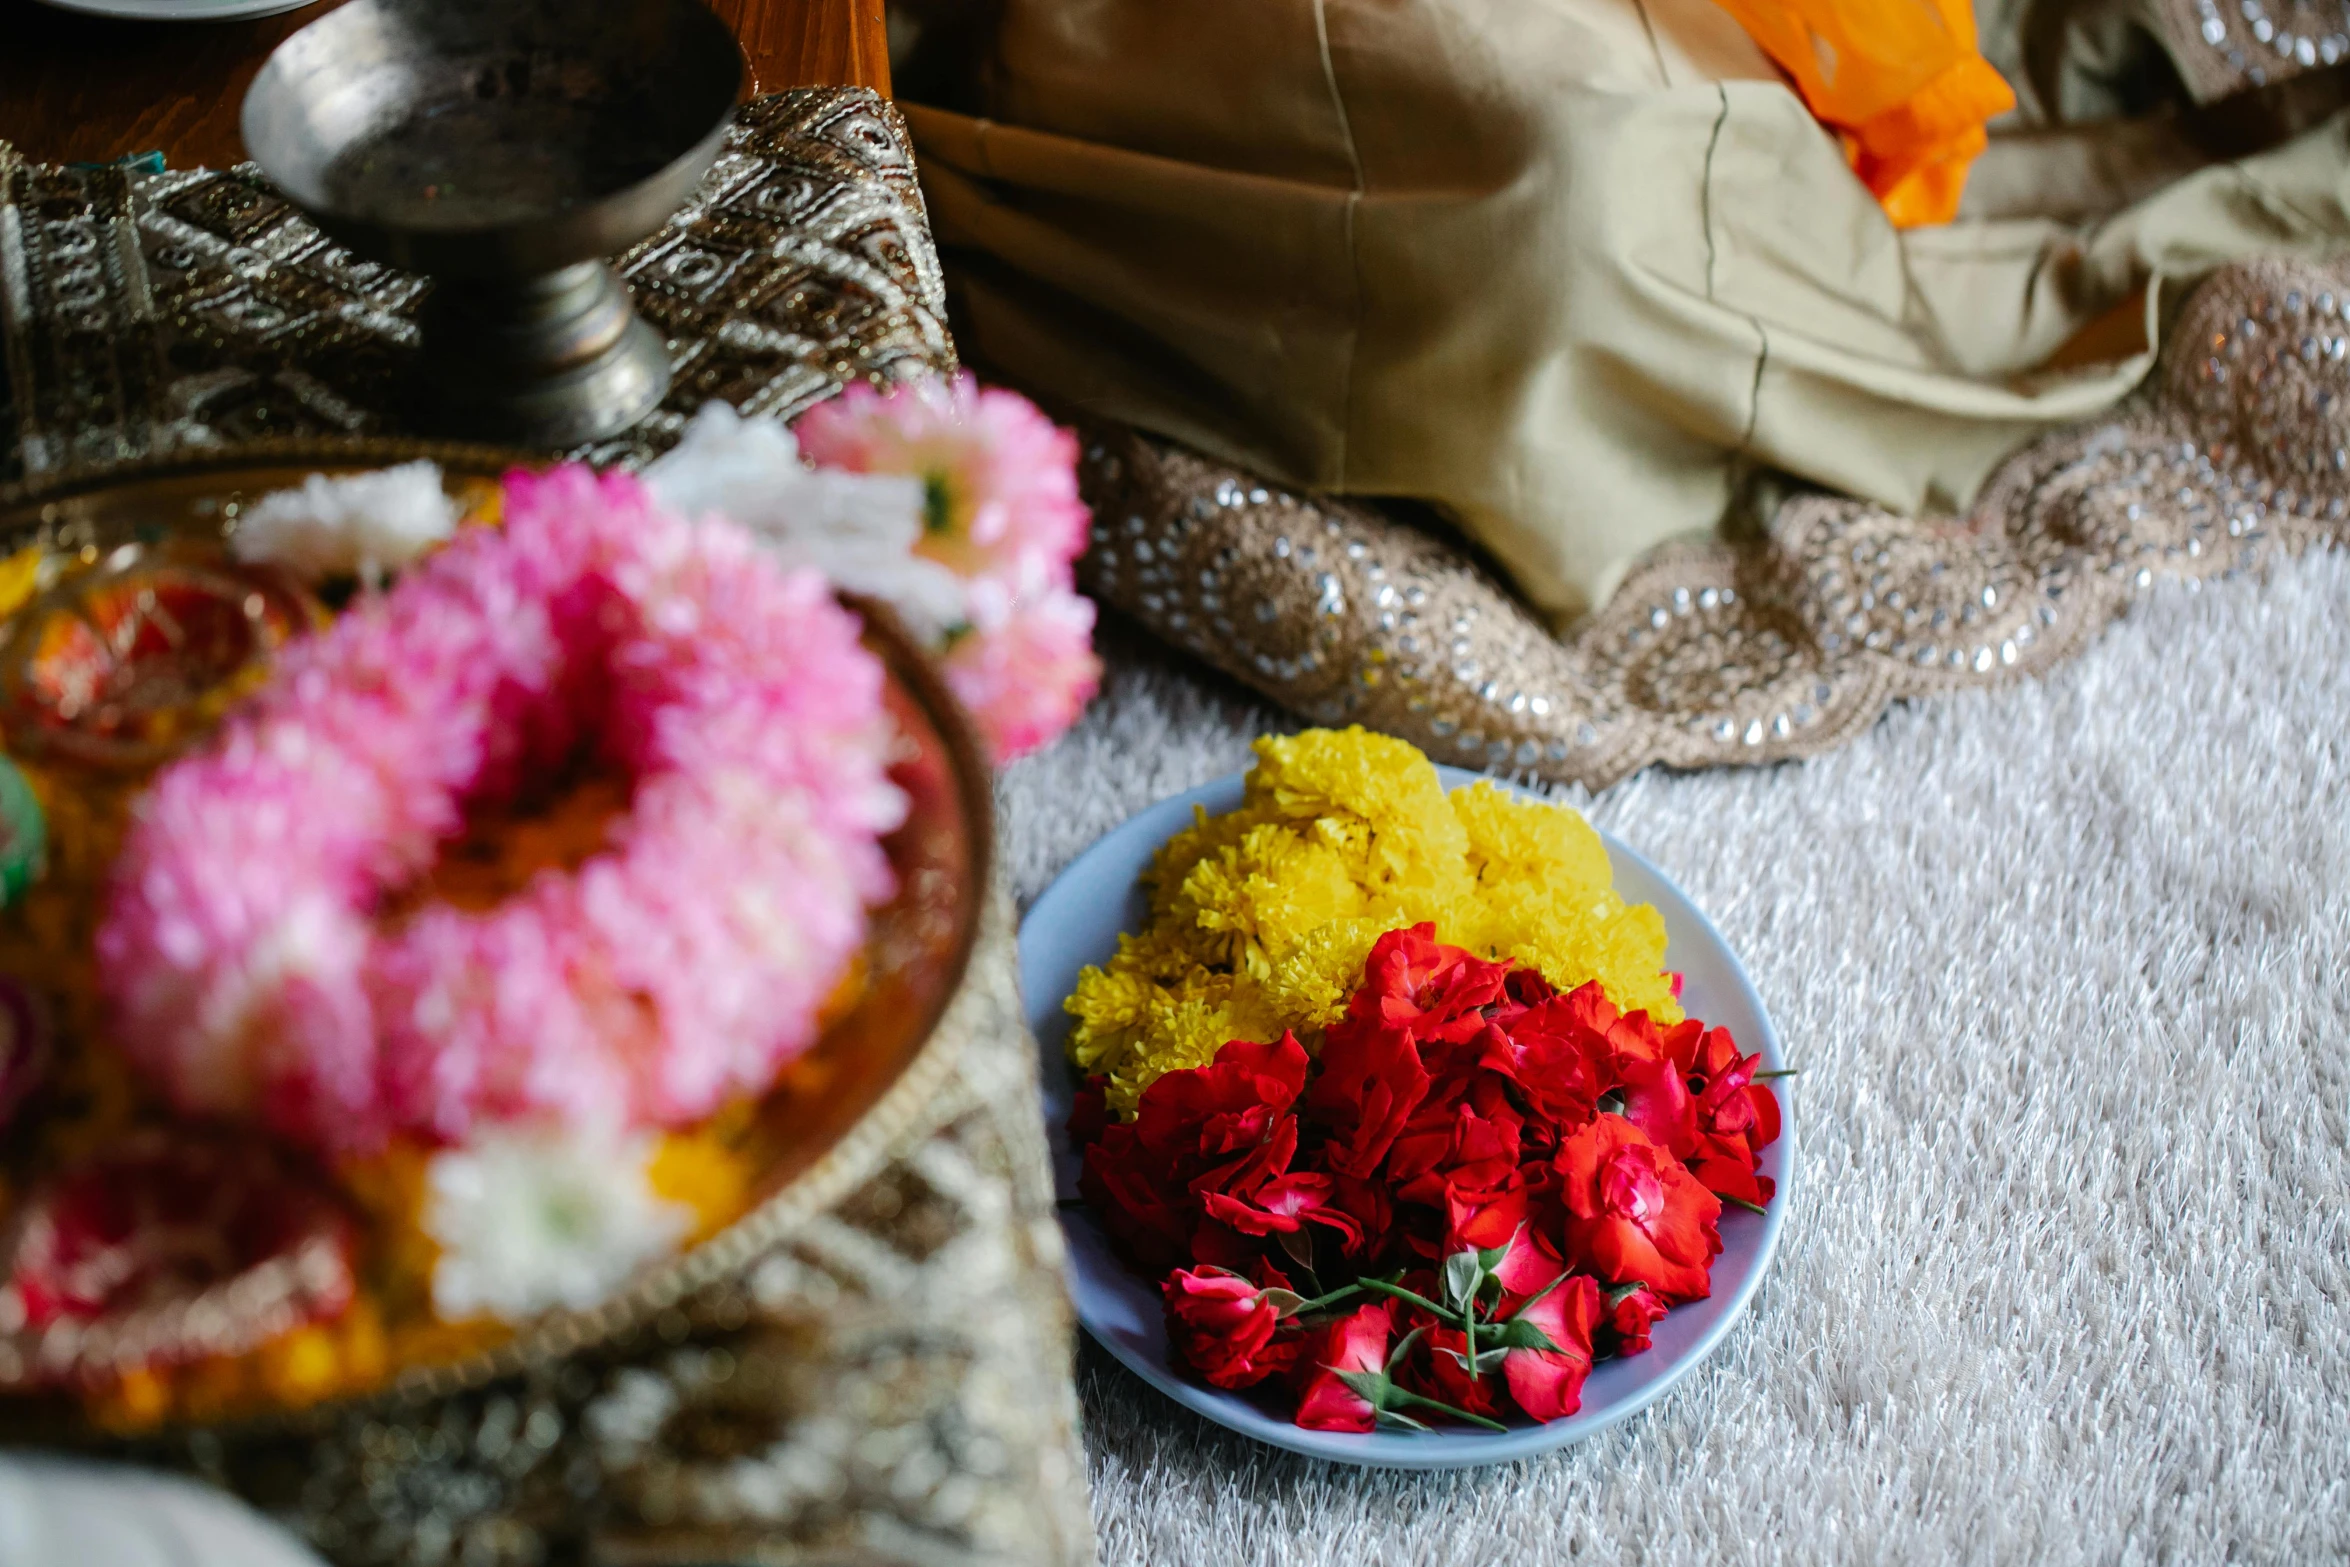 a bowl of flowers sitting on top of a table, hurufiyya, yellow carpeted, red and gold cloth, bed of flowers on floor, offering a plate of food